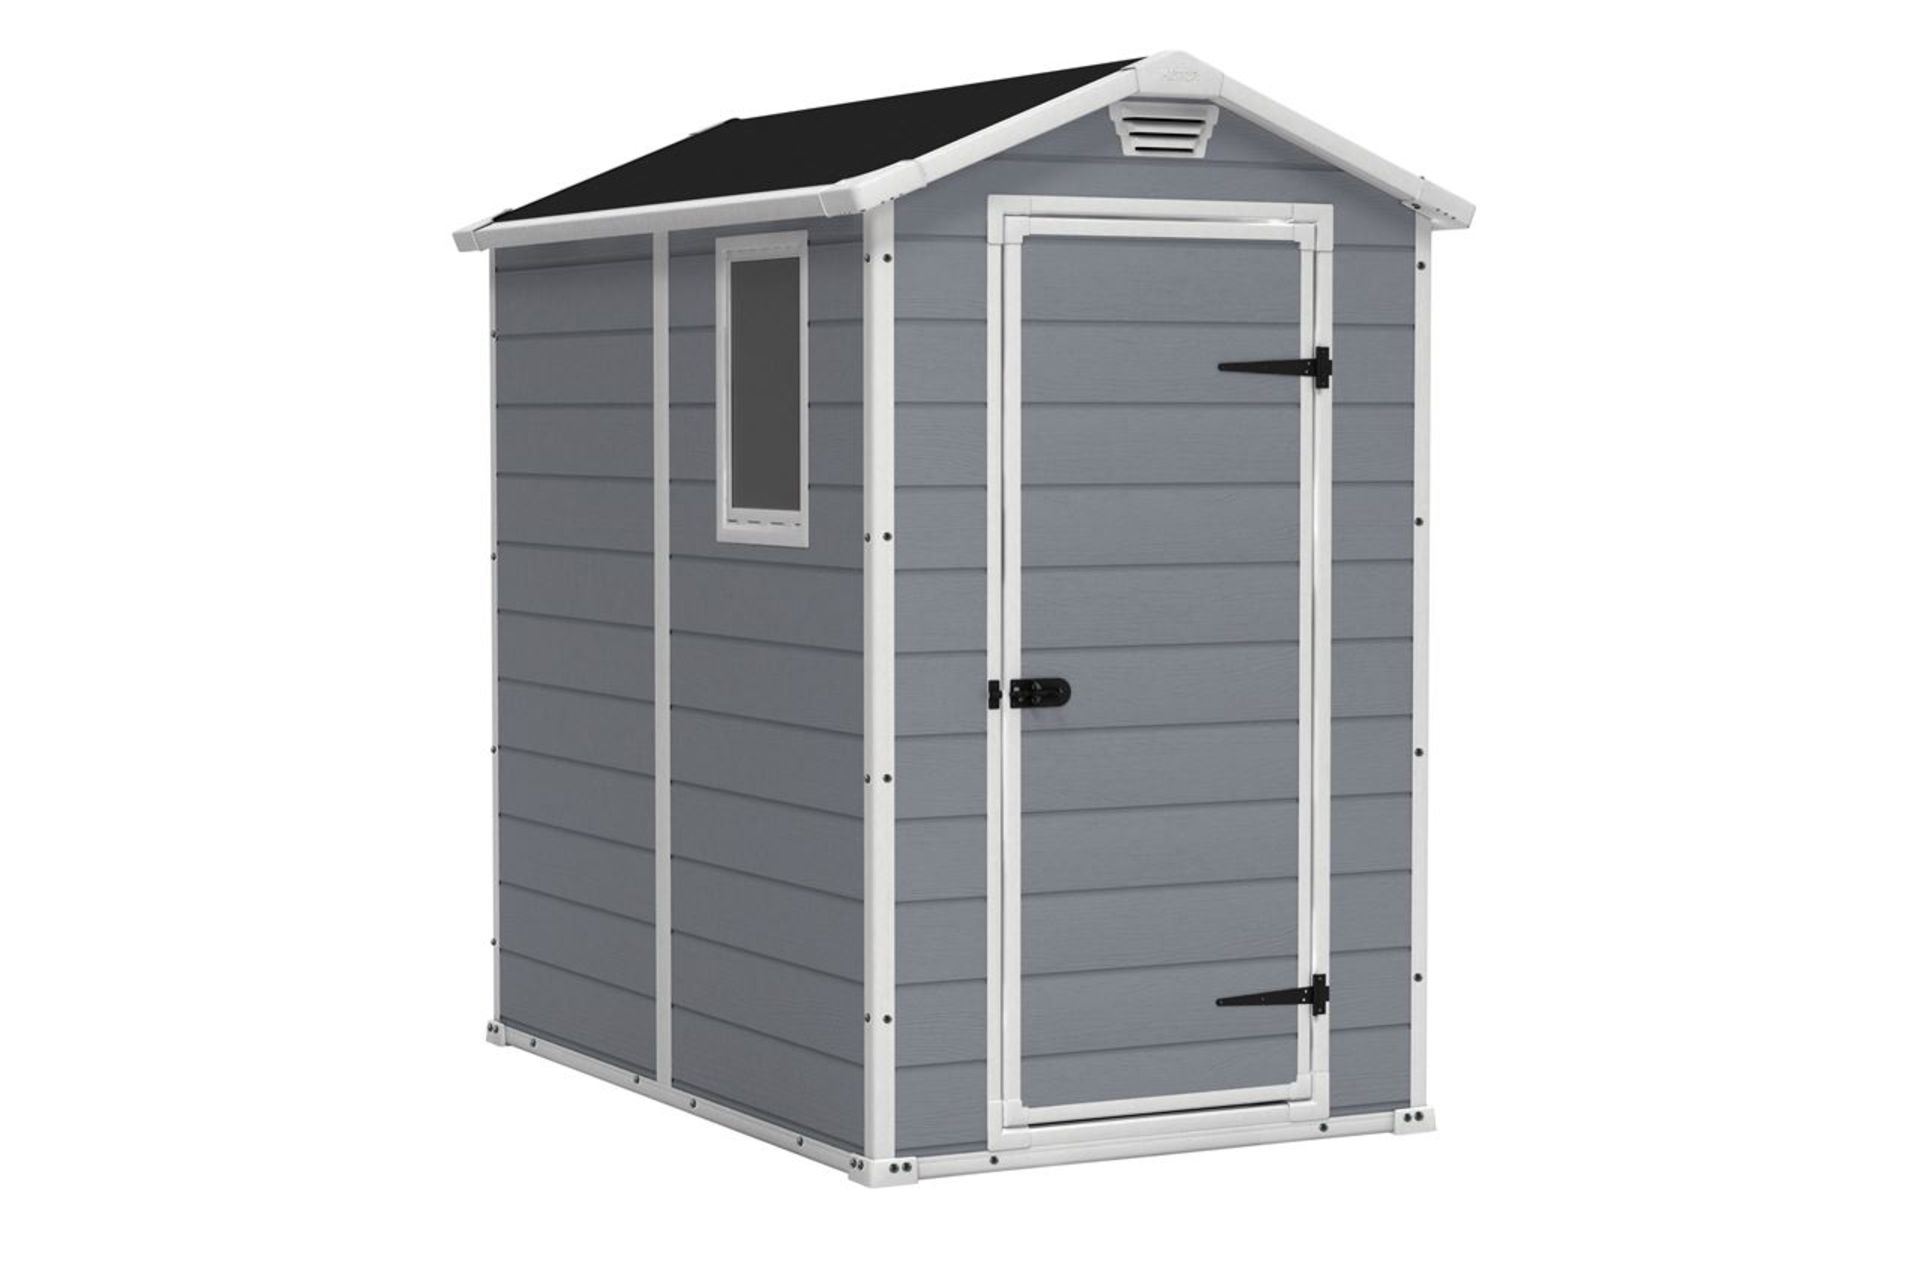 Keter Manor 4 x 6s Shed RRP £800 - Image 3 of 3